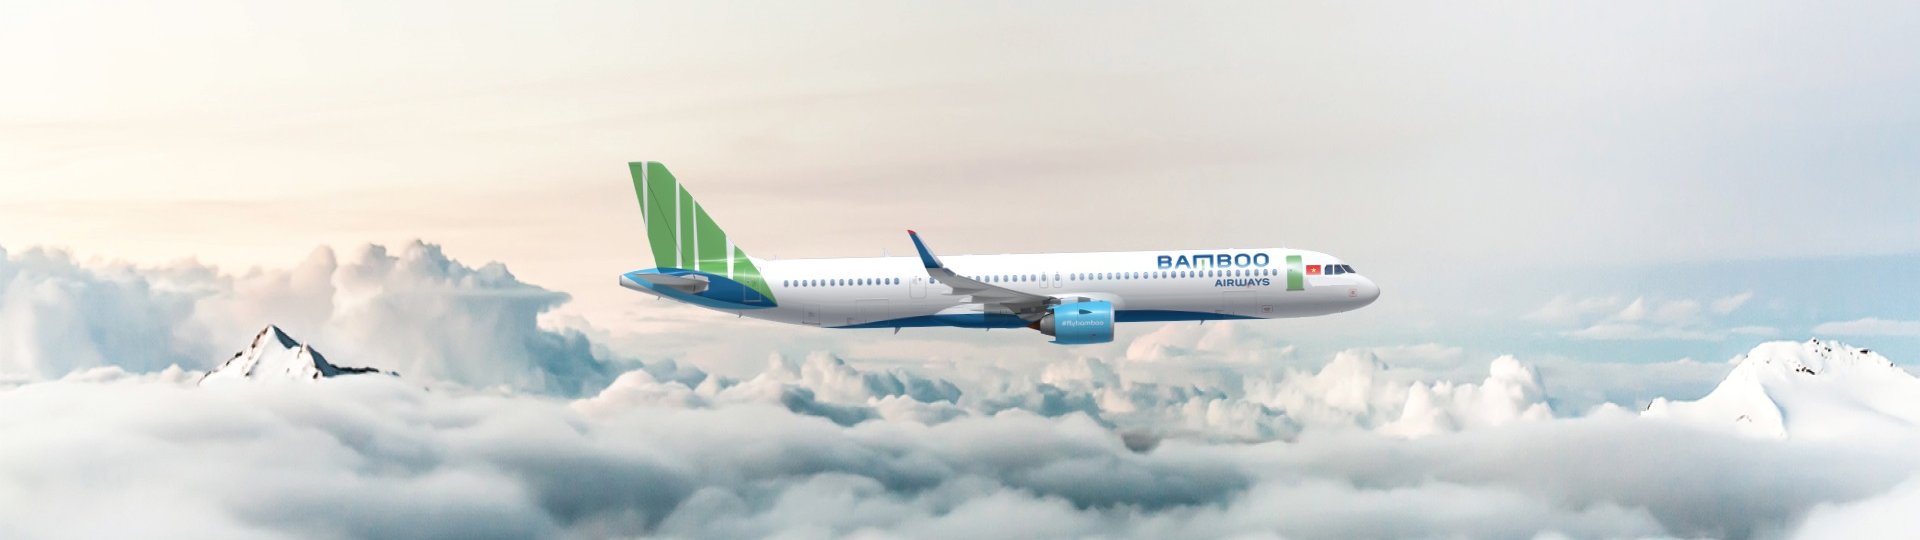 Bamboo Airways charts new course, pushing ahead with restructuring